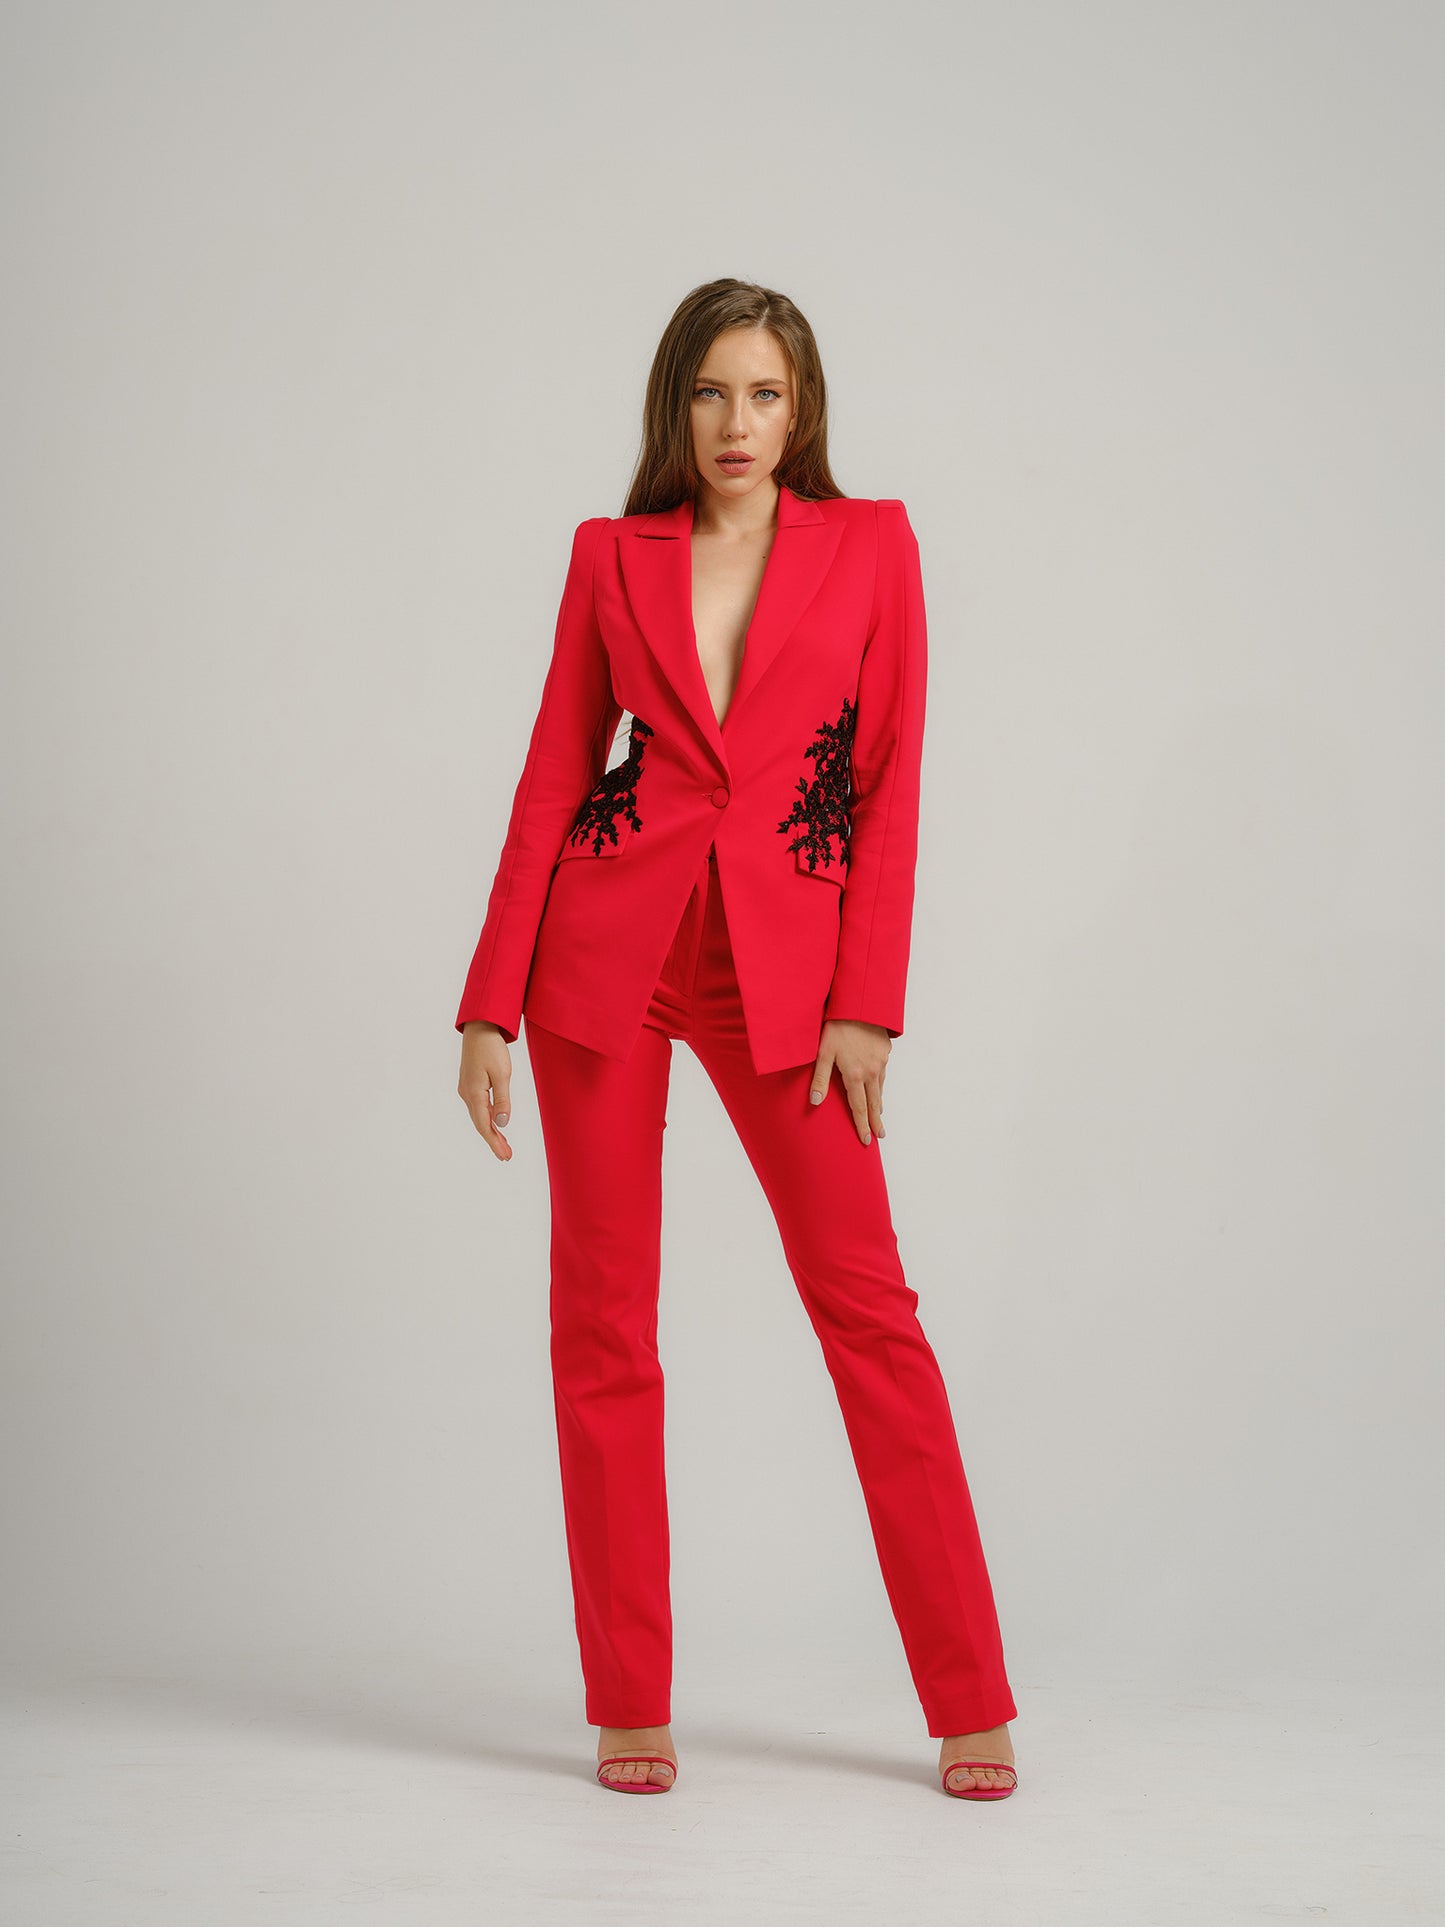 Fantasy Tailored Suit with Embroidery - Red by Tia Dorraine Women's Luxury Fashion Designer Clothing Brand